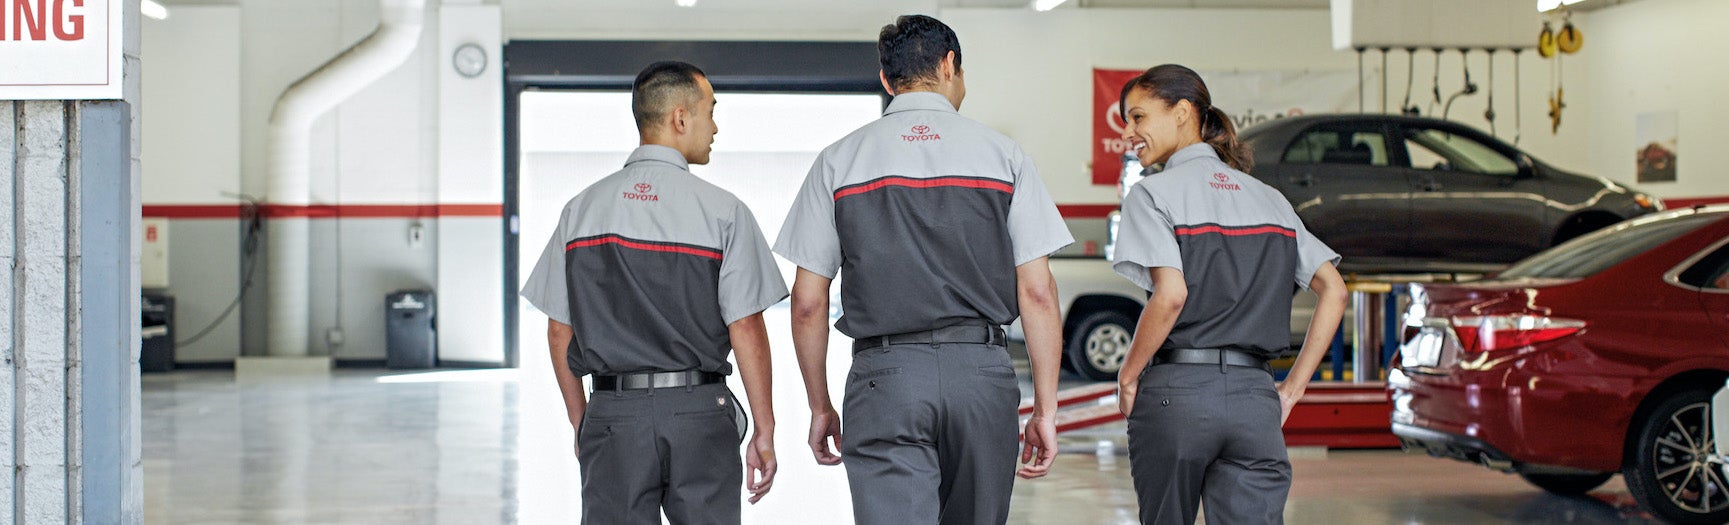 Bennett Toyota of Lebanon is a Car Dealership near Cleona, PA | Toyota Service Technicians walking and talking in Toyota service center